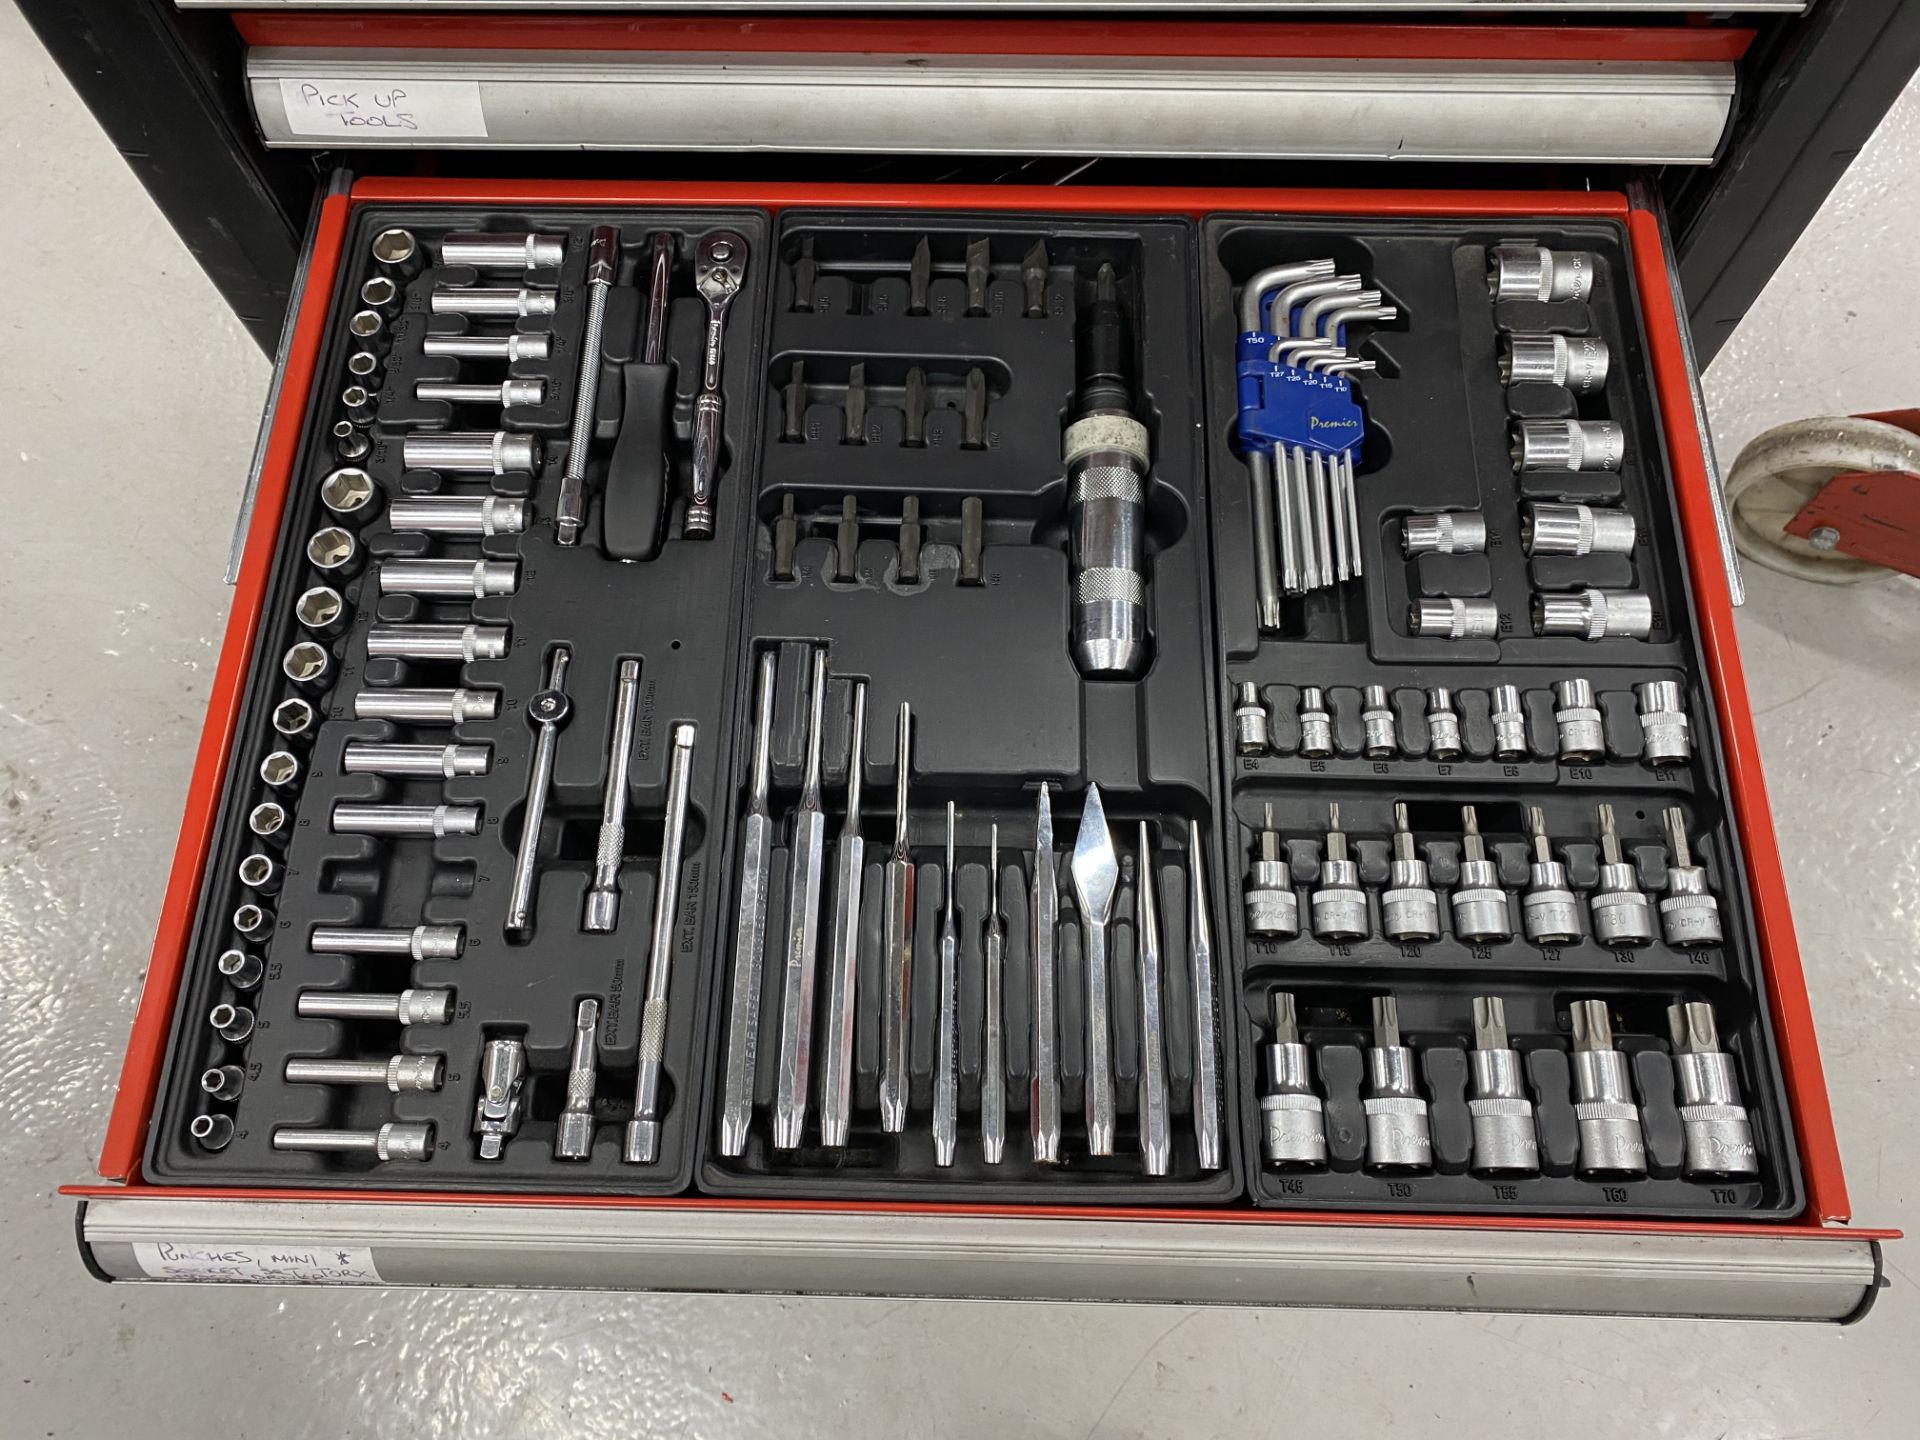 Sealey 10 drawer mobile toolbox including the following tools, rings and open ended spanners 7mm- - Image 7 of 11